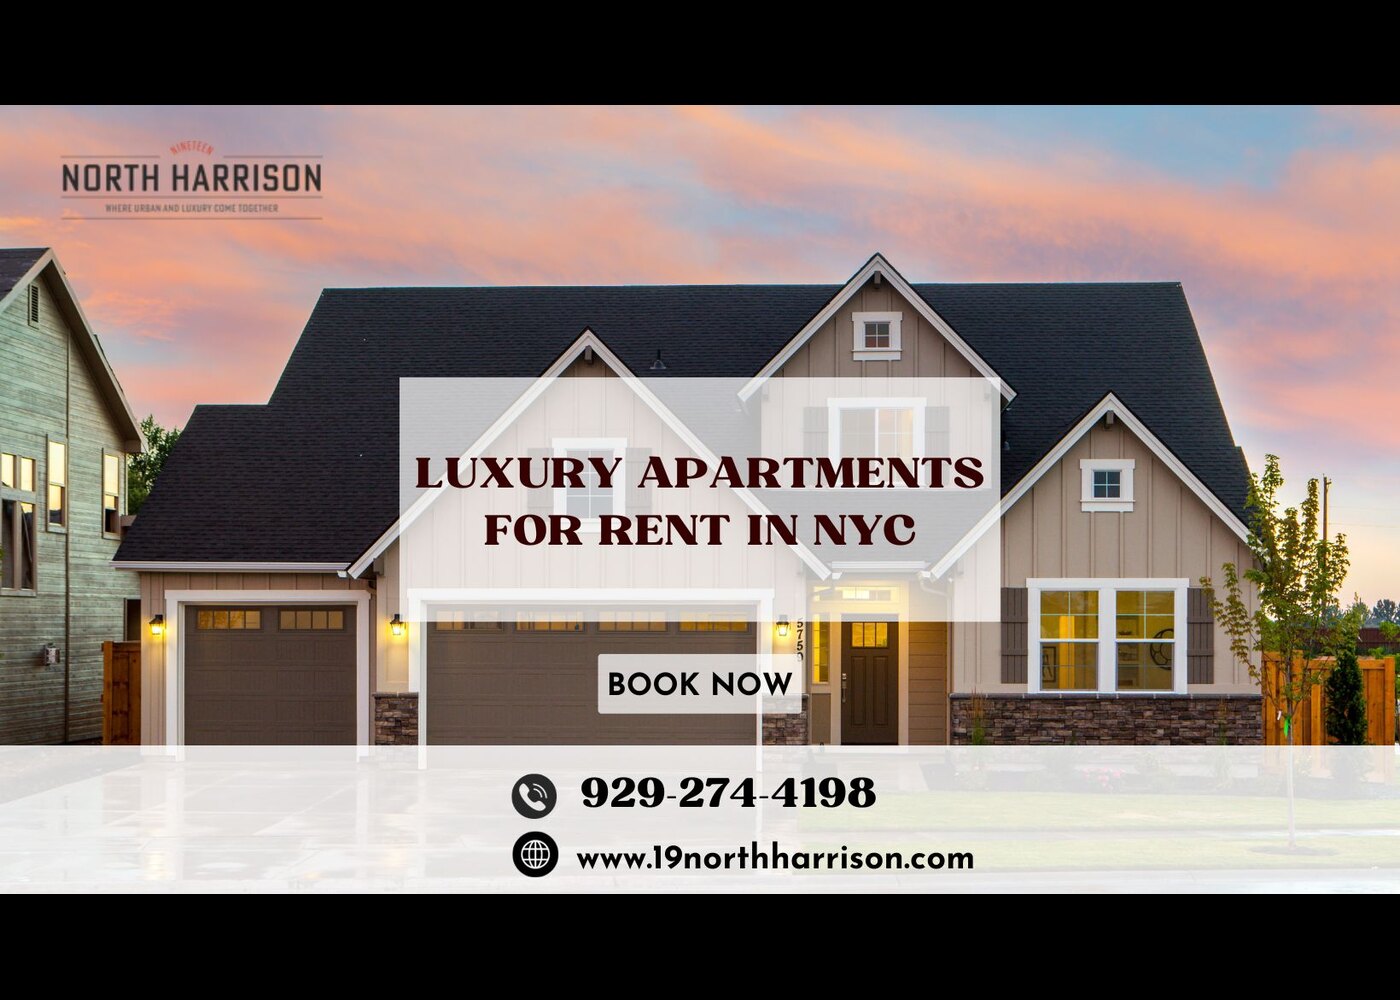 10 Tips for Finding the Perfect Luxury Apartments for Rent in NJ